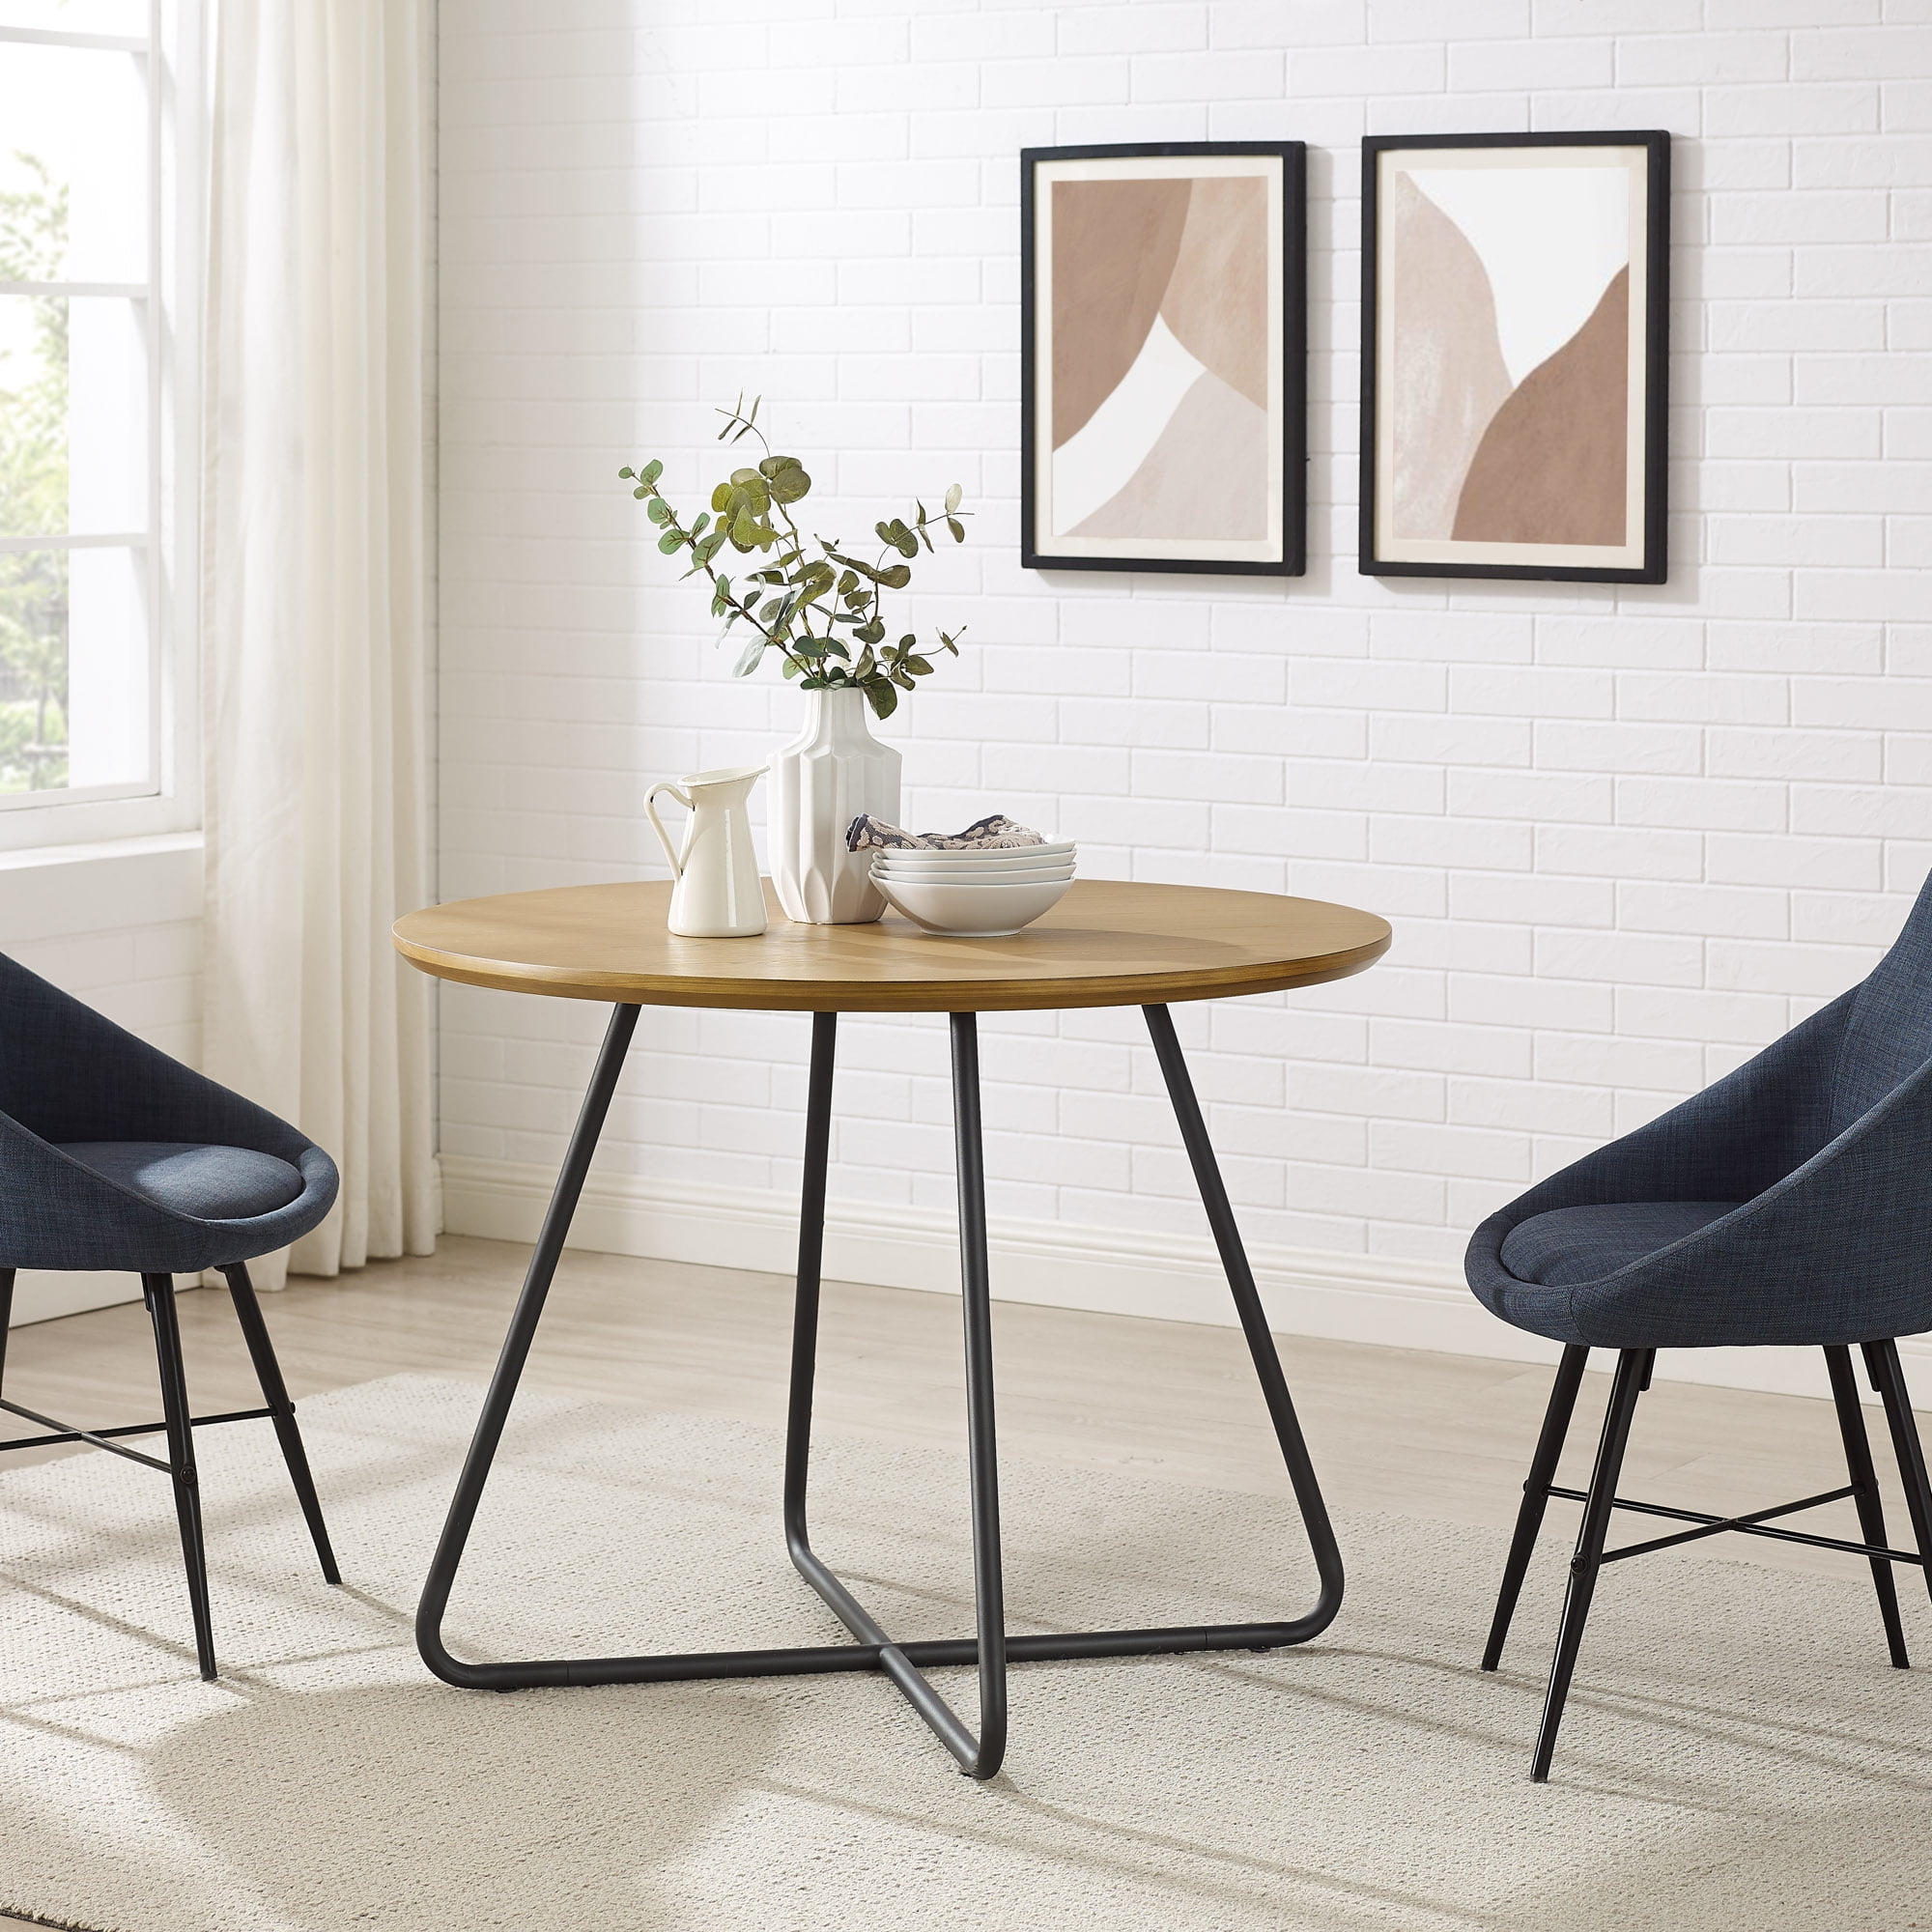 Gap Home Furniture Is Now at Walmart—Here's What to Shop